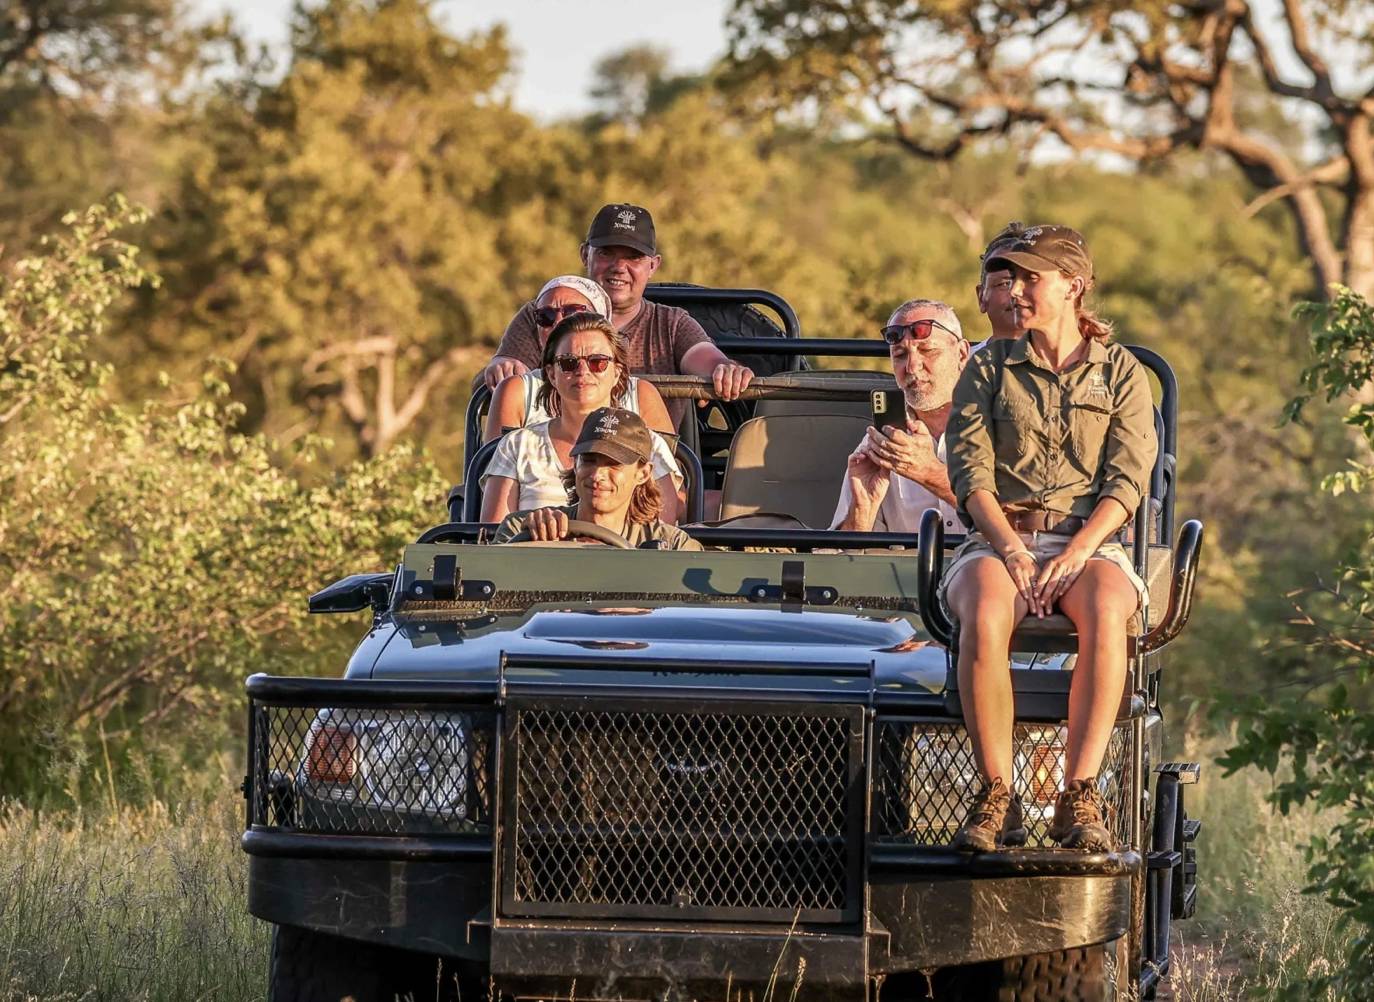 Luxury Safari Magazine welcomes Ximuwu Lodge an exclusive sanctuary within the Klaserie Private Nature Reserve